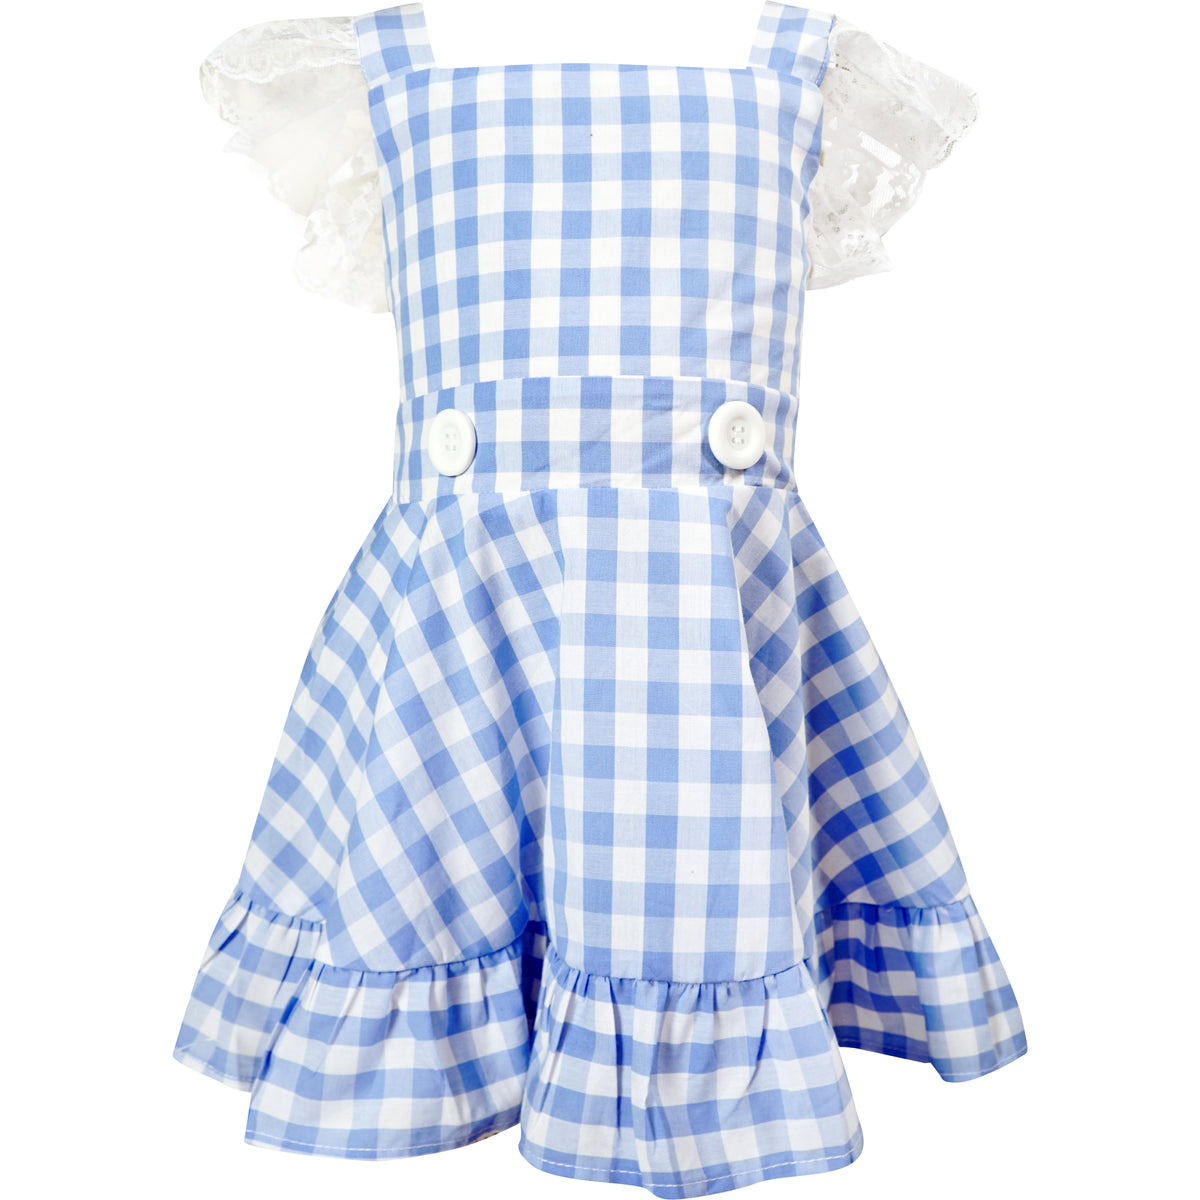 Baby Girls Wizard Of Oz Dorothy Blue Gingham Pinafore Dress - Blue/White - Angeline Kids